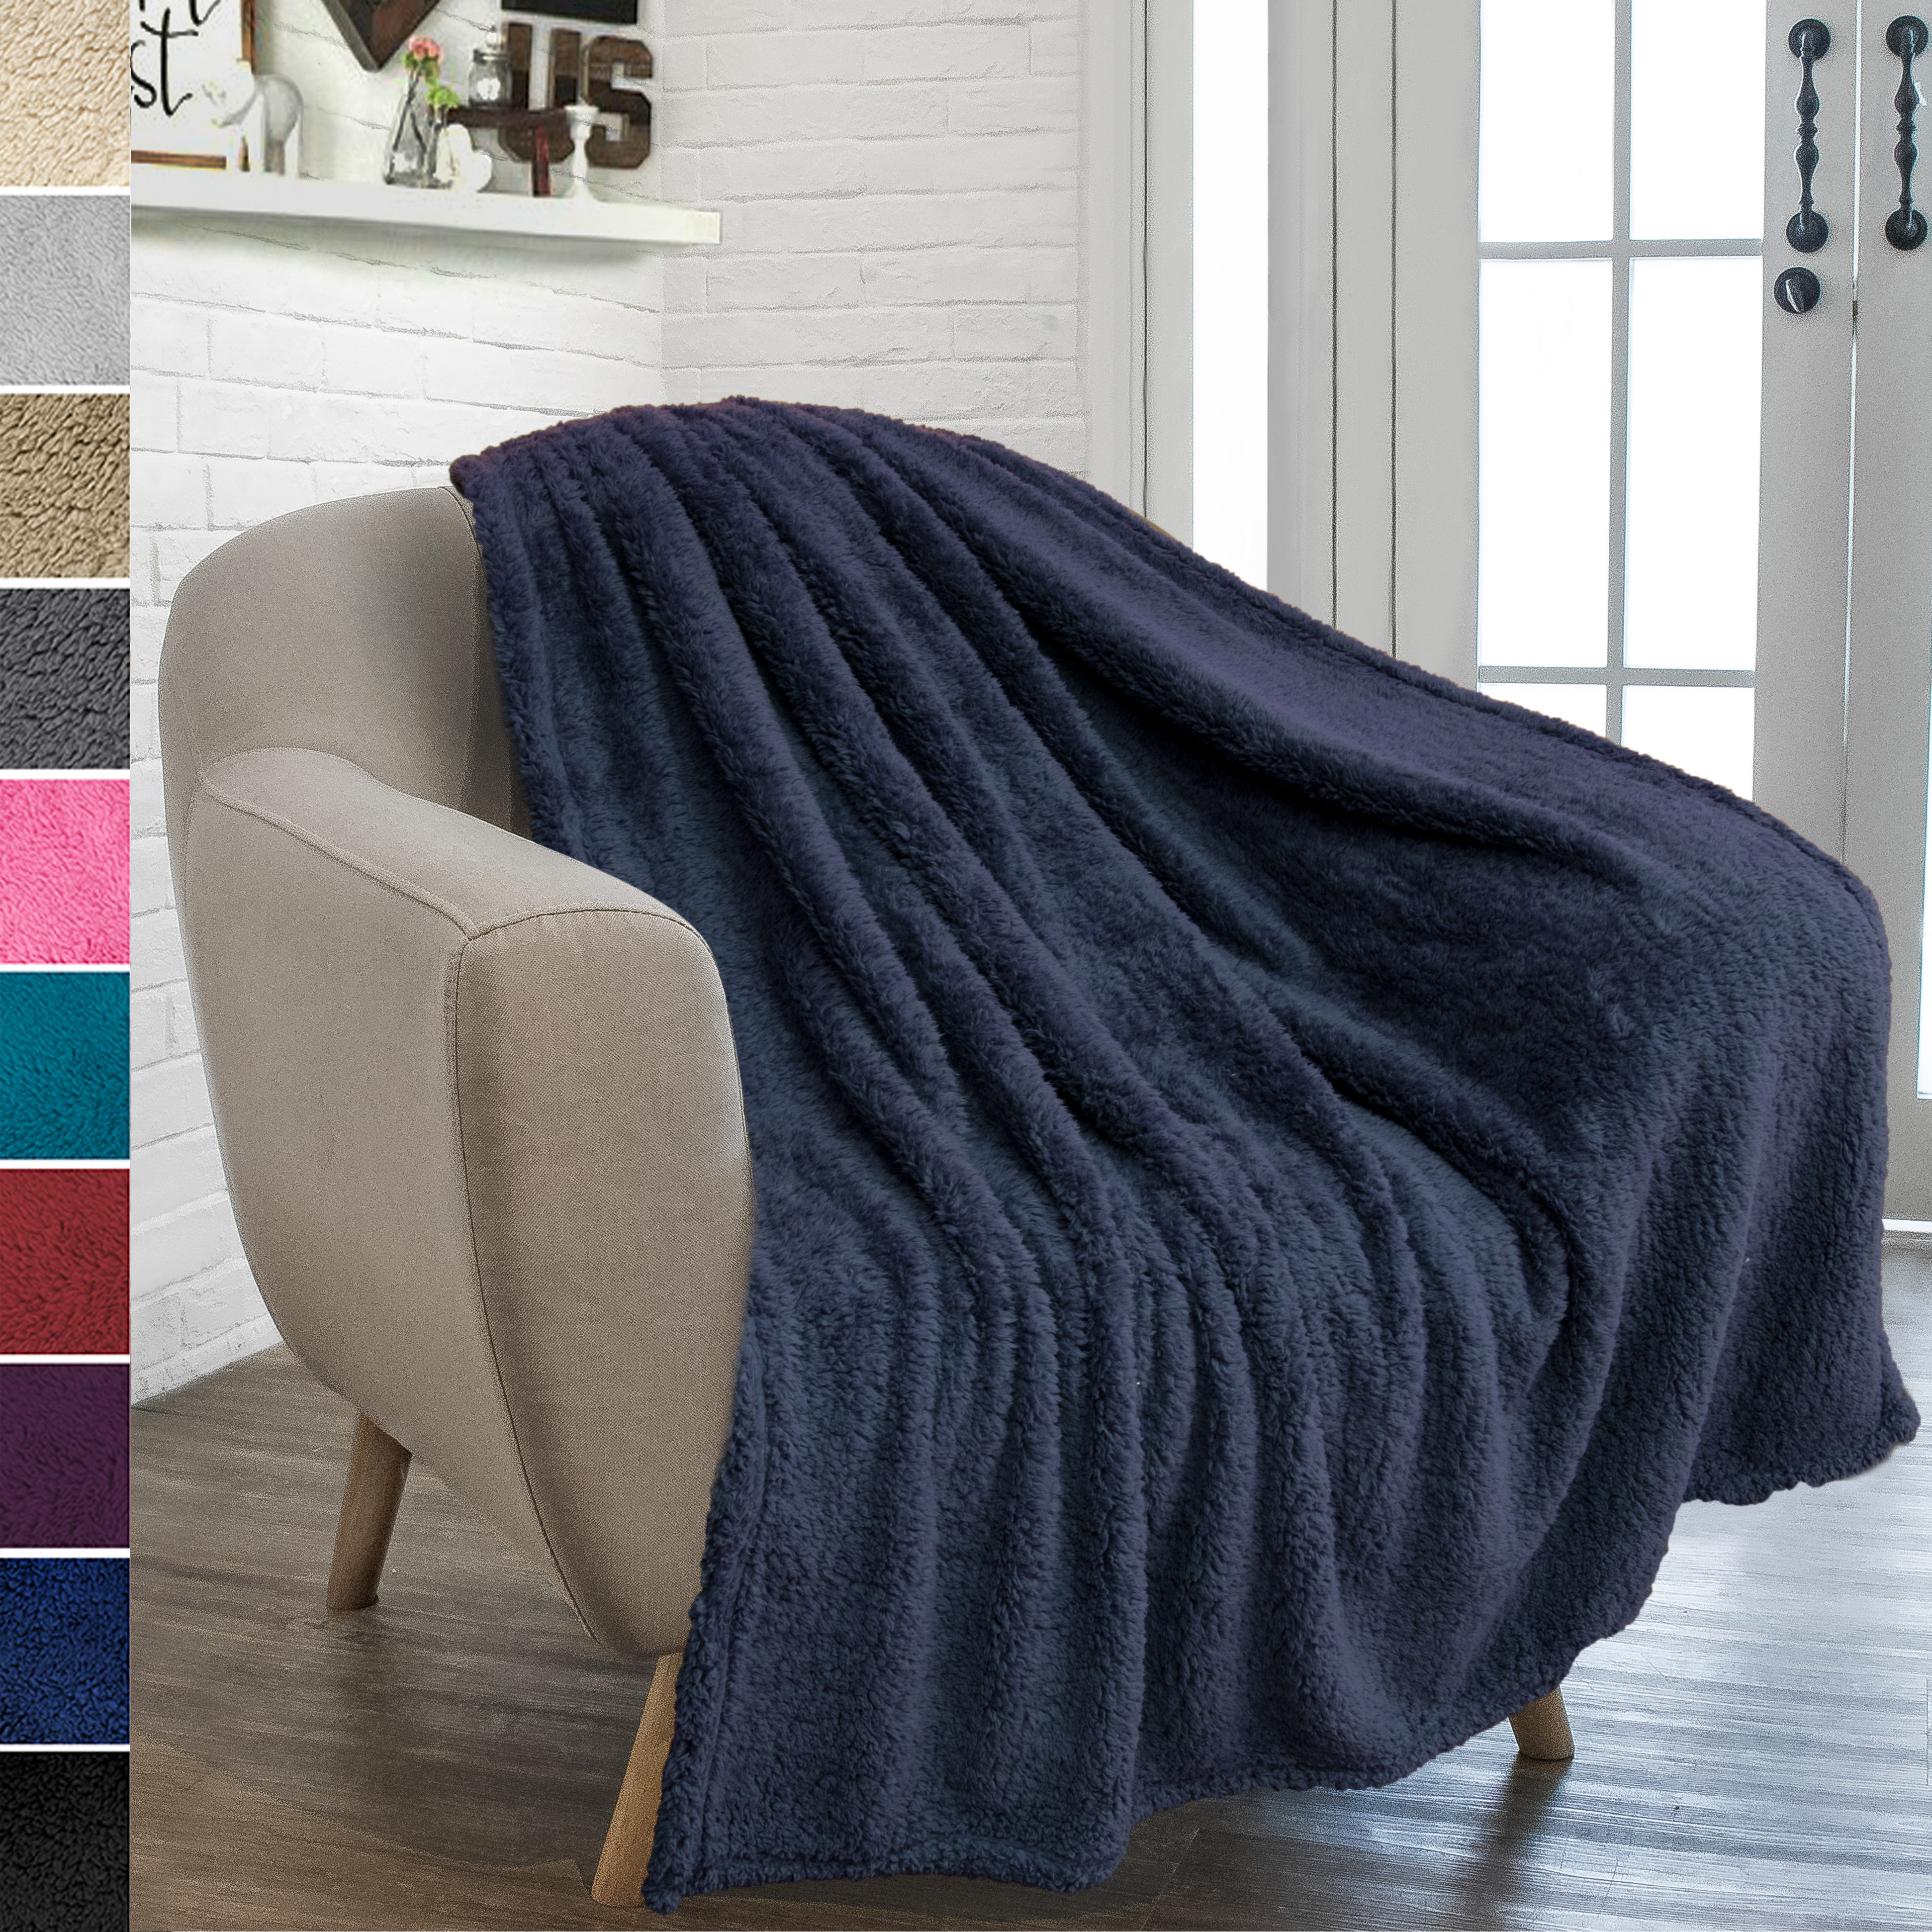 Zadaling Sherpa Fleece Blanket Throws,Quotes Soft Bed Blanket Cozy Luxury Blanket 50x60,Fuzzy Thick Reversible Warm Fluffy Microfiber Plush Throw Blanket for Couch Bed Sofa 